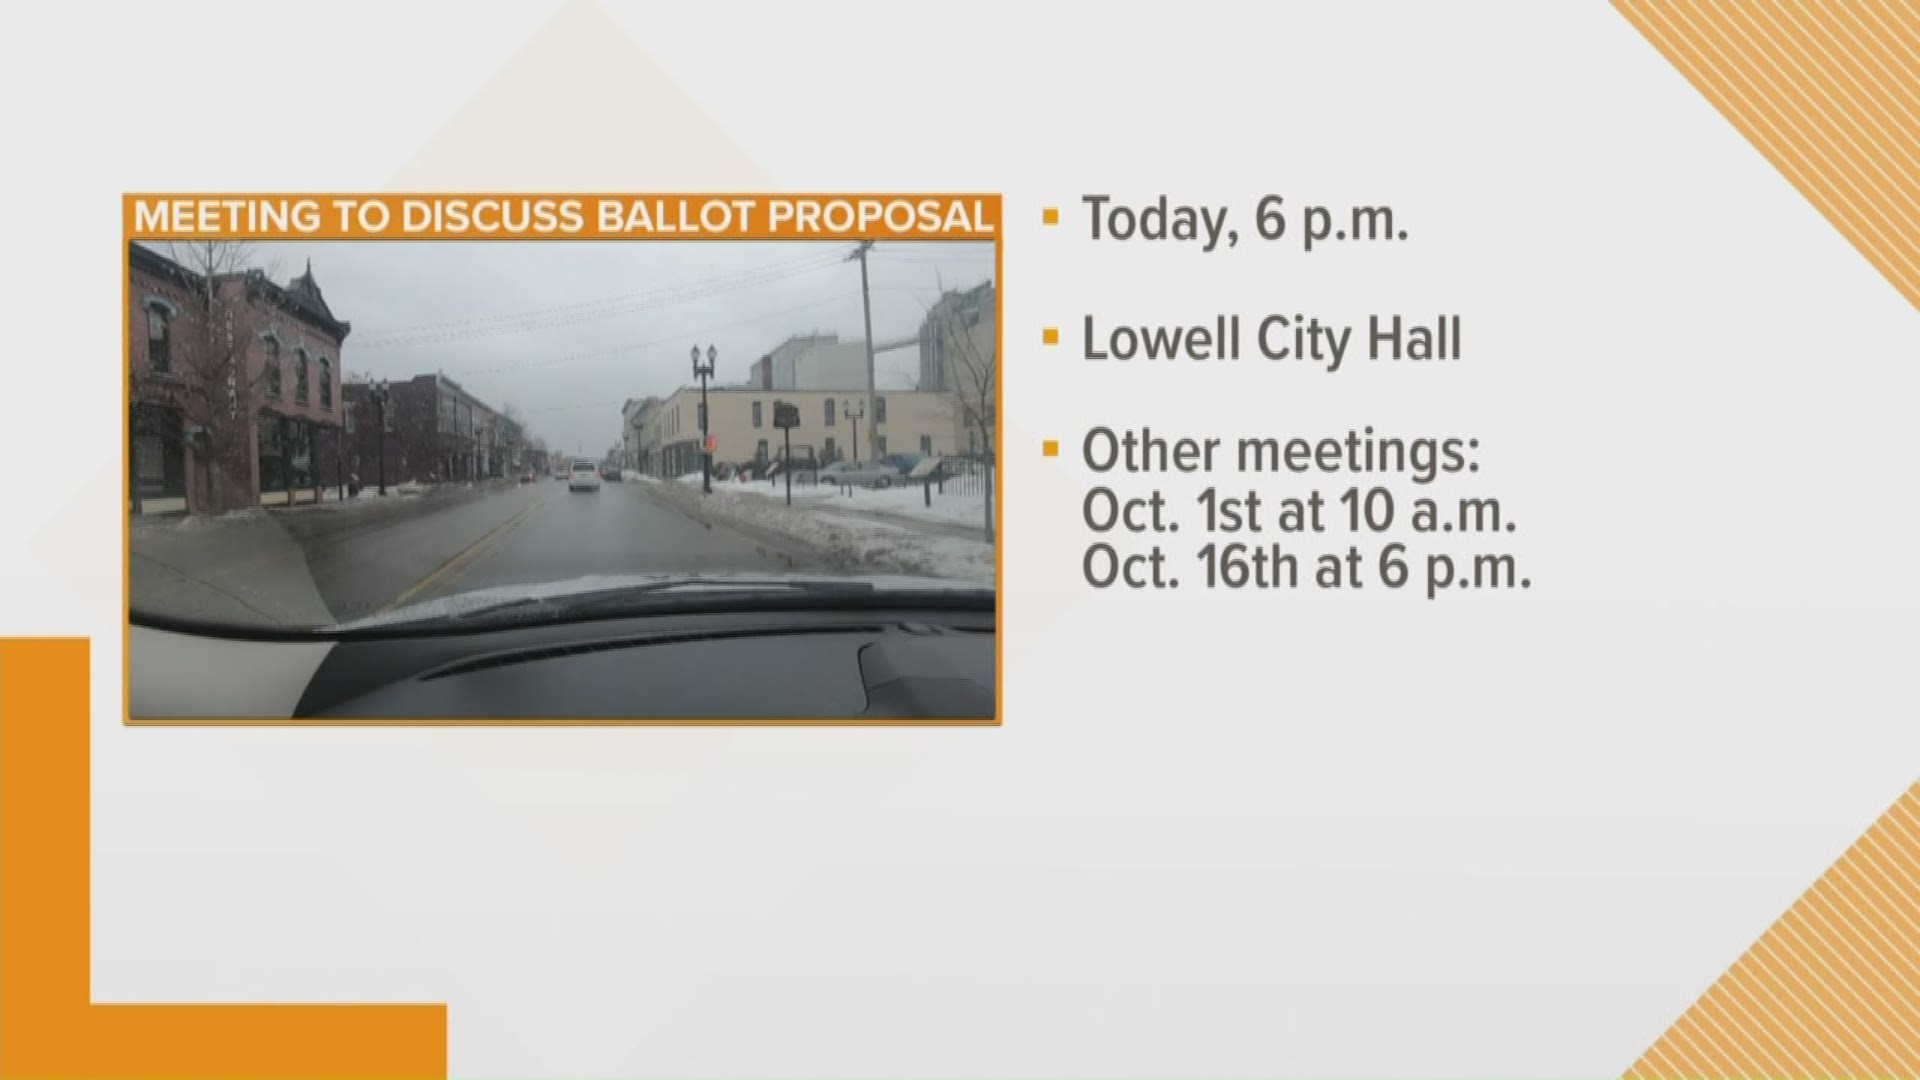 The City of Lowell is asking residents to consider a ballot proposal that would allow the city to collect income tax in order to repair roads and streets.